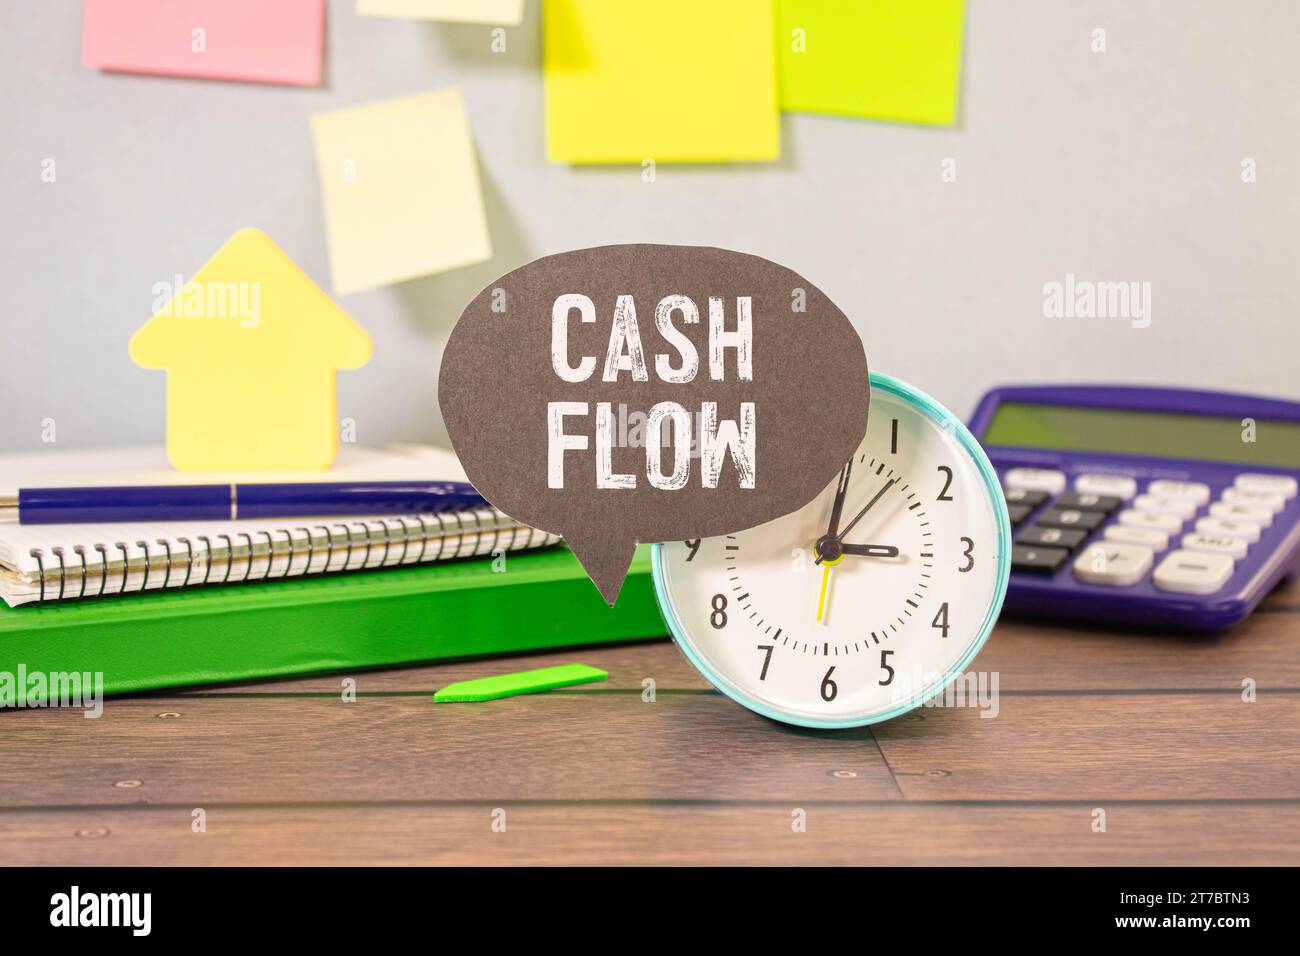 Business card with text Cash Flow. Diagram and green pen. Concept photo Stock Photo